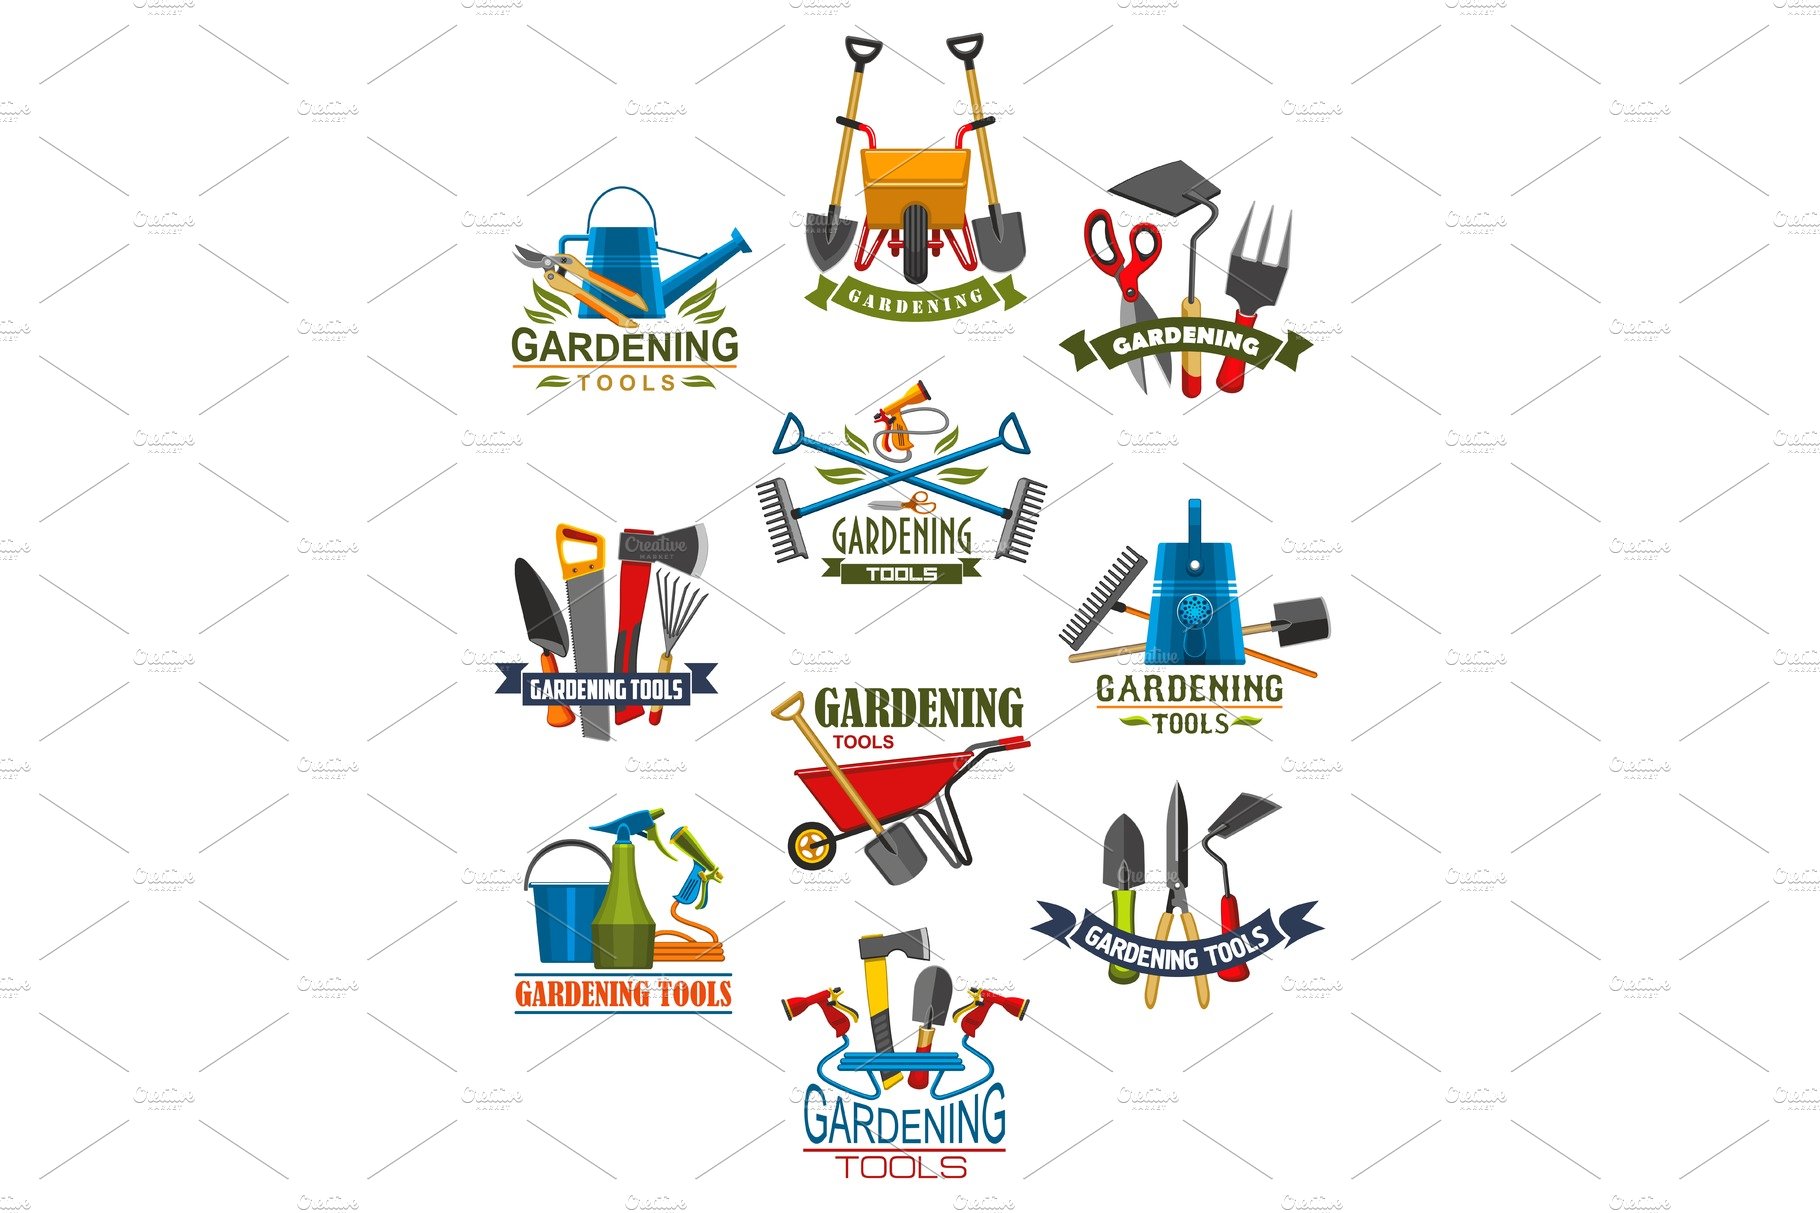 Gardening tool and garden equipment isolated icon cover image.